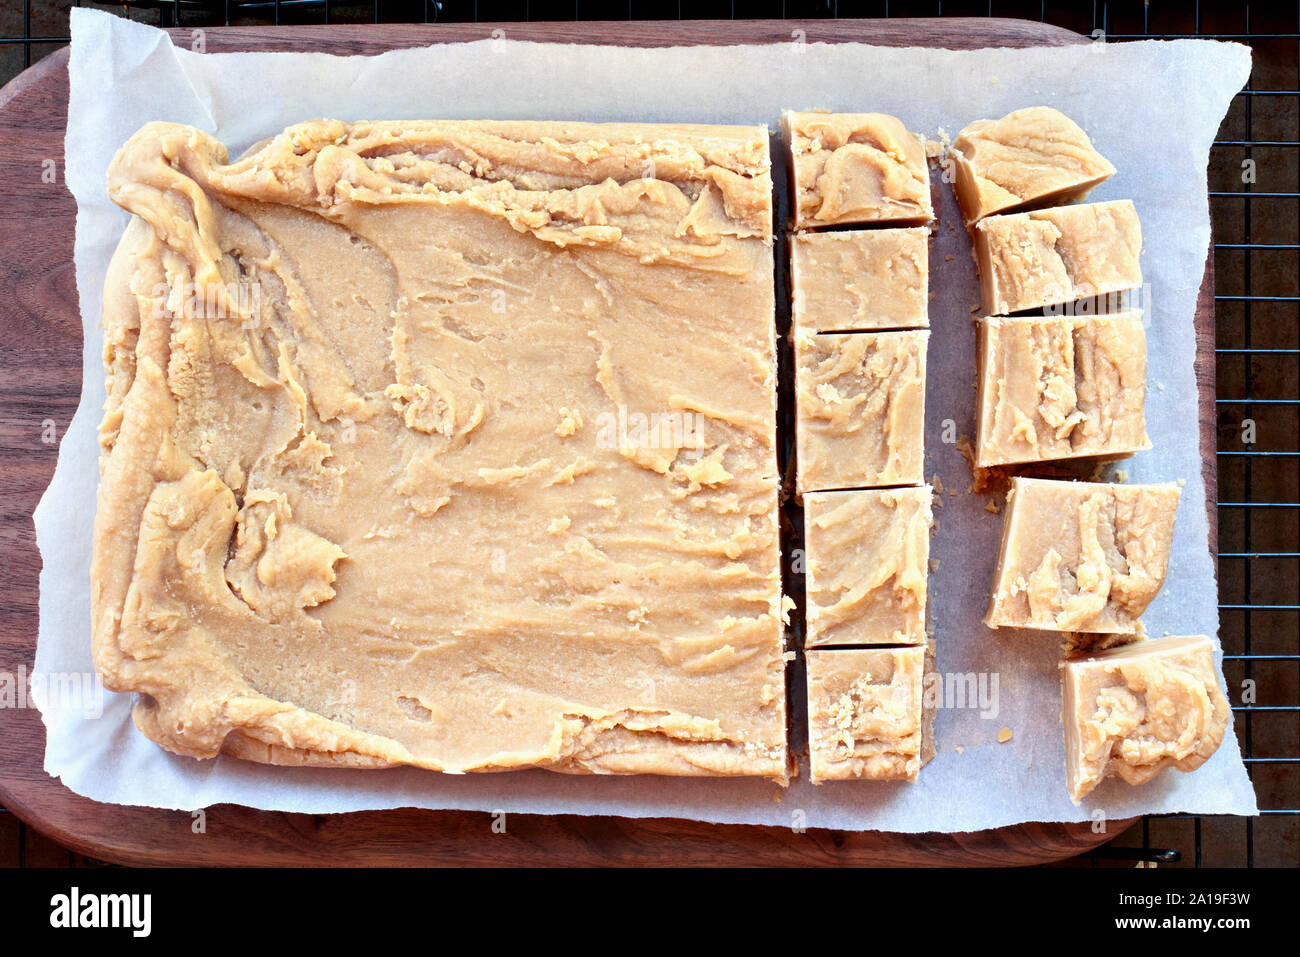 Whole block of delicious, homemade peanut butter fudge over a rustic wood cutting board being cut into squares. Stock Photo